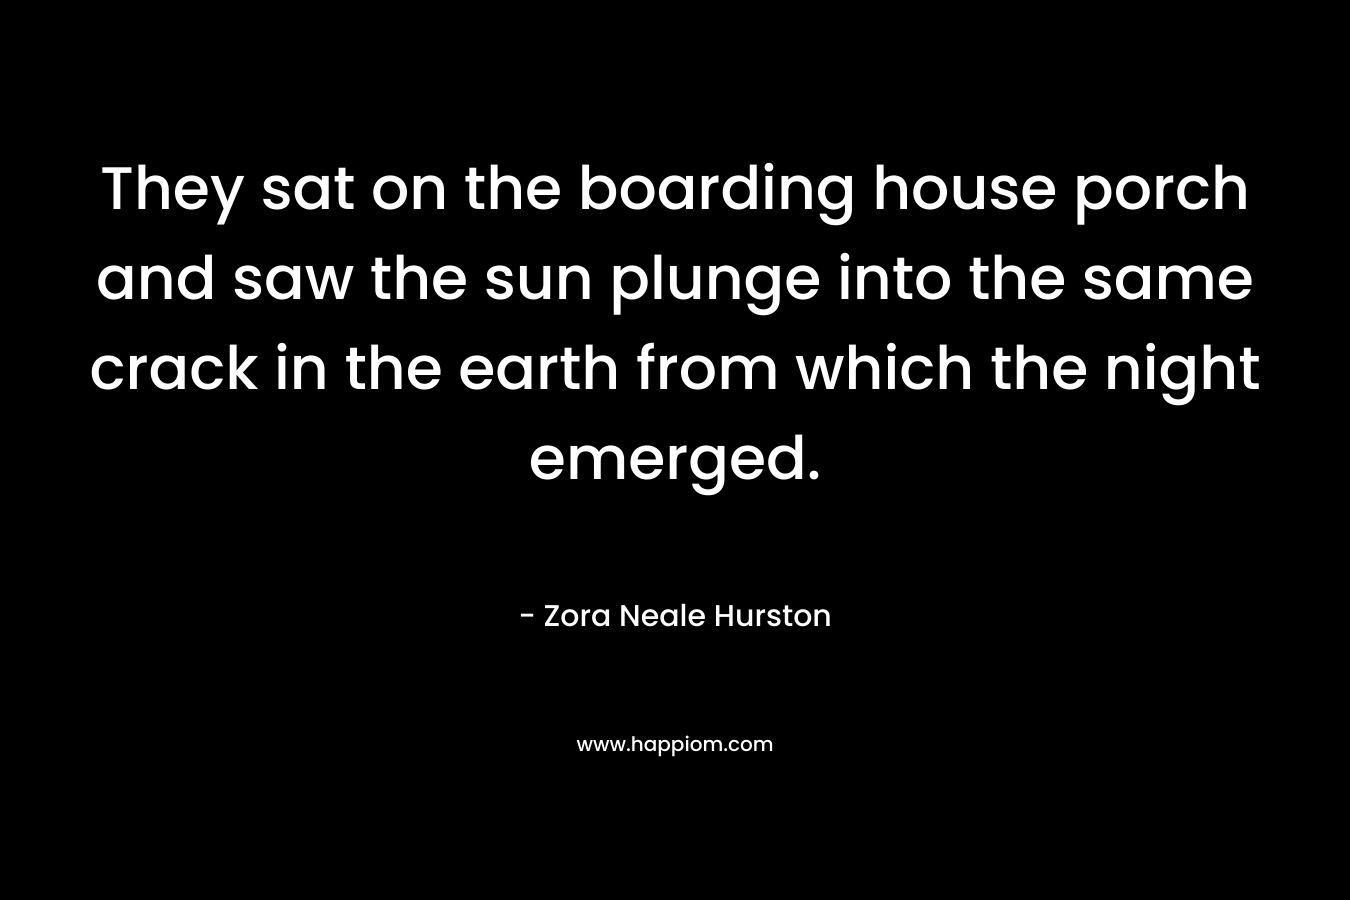 They sat on the boarding house porch and saw the sun plunge into the same crack in the earth from which the night emerged. – Zora Neale Hurston